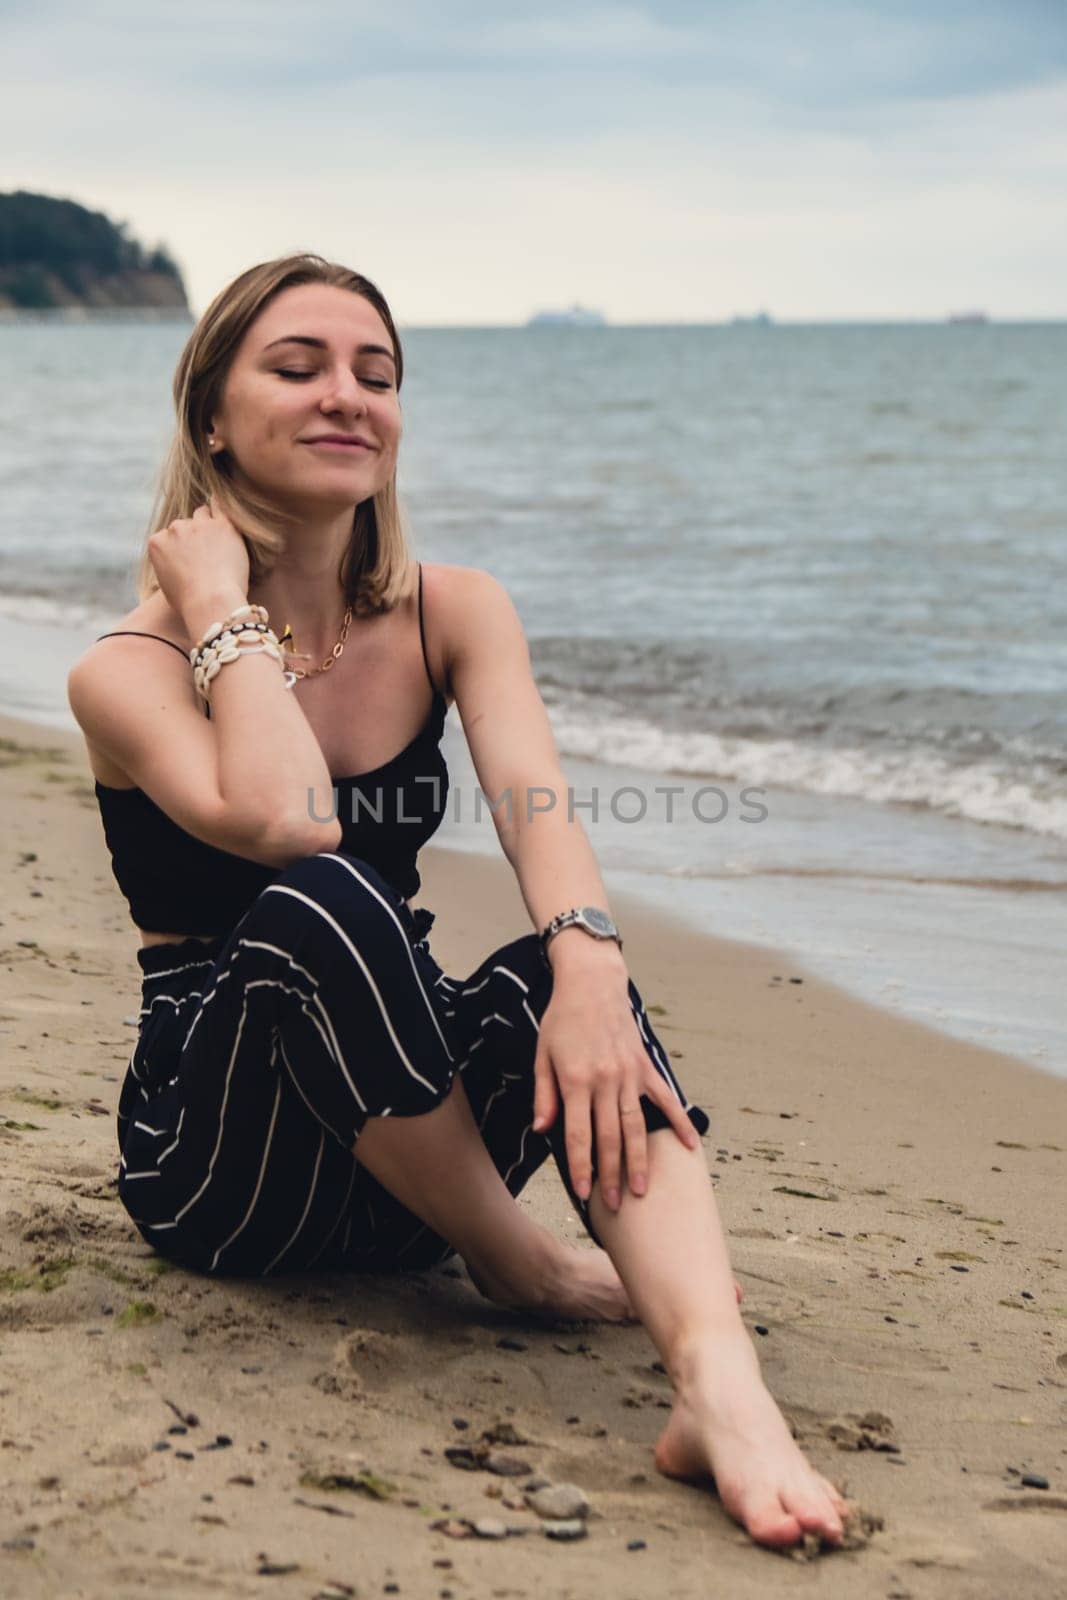 Young woman siting on blurred beachside background. Attractive female enjoying the sea shore. travel and active lifestyle concept. Springtime. Relaxation, youth, love, lifestyle solitude with nature. Wellness wellbeing mental health inner peace Slow life digital detox